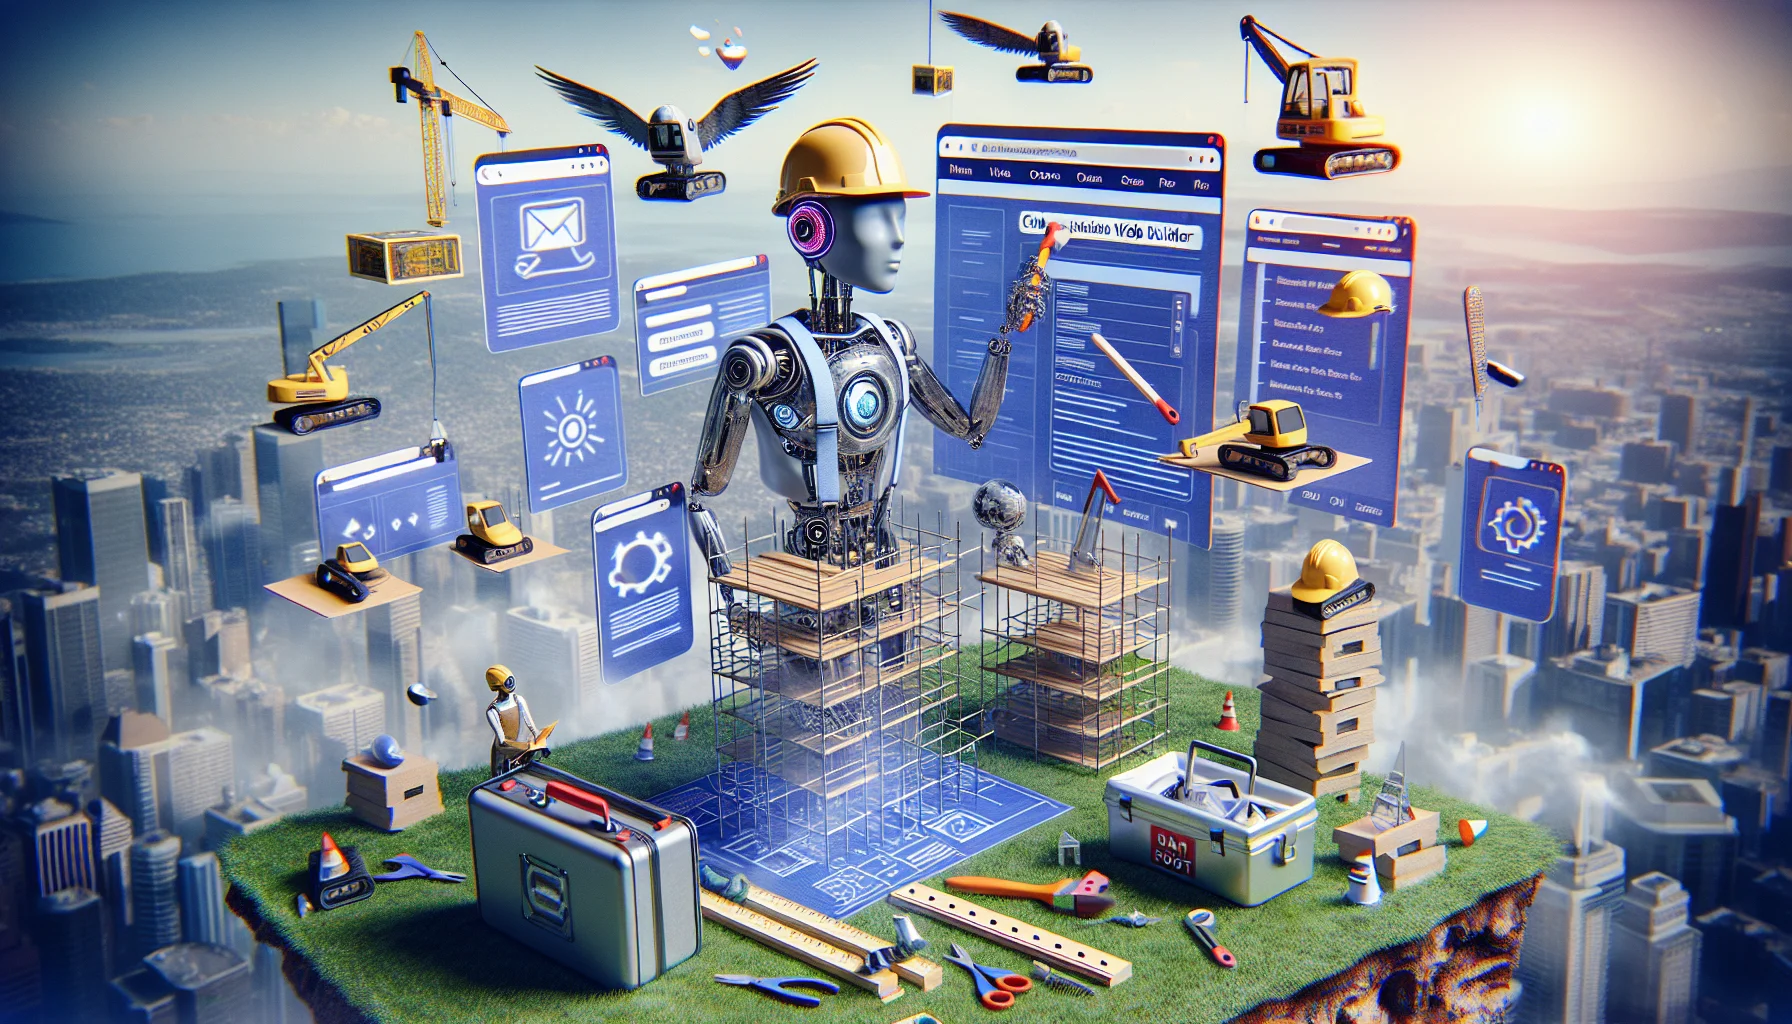 This is an unusual scene: imagine a humanoid AI, gender-neutral and racially unidentified, surrounded by floating elements of a web page: headers, footers, images, and buttons. It's engaged in the seemingly humorous task of constructing a website like a traditional builder, complete with a hard hat, toolkit and blueprint plans labelled 'chat GPT website builder'. It's operating on a floating 'web hosting' platform high above a digital cityscape. The funny juxtaposition of real-world construction with digital web design elements creates a visually enticing scene.